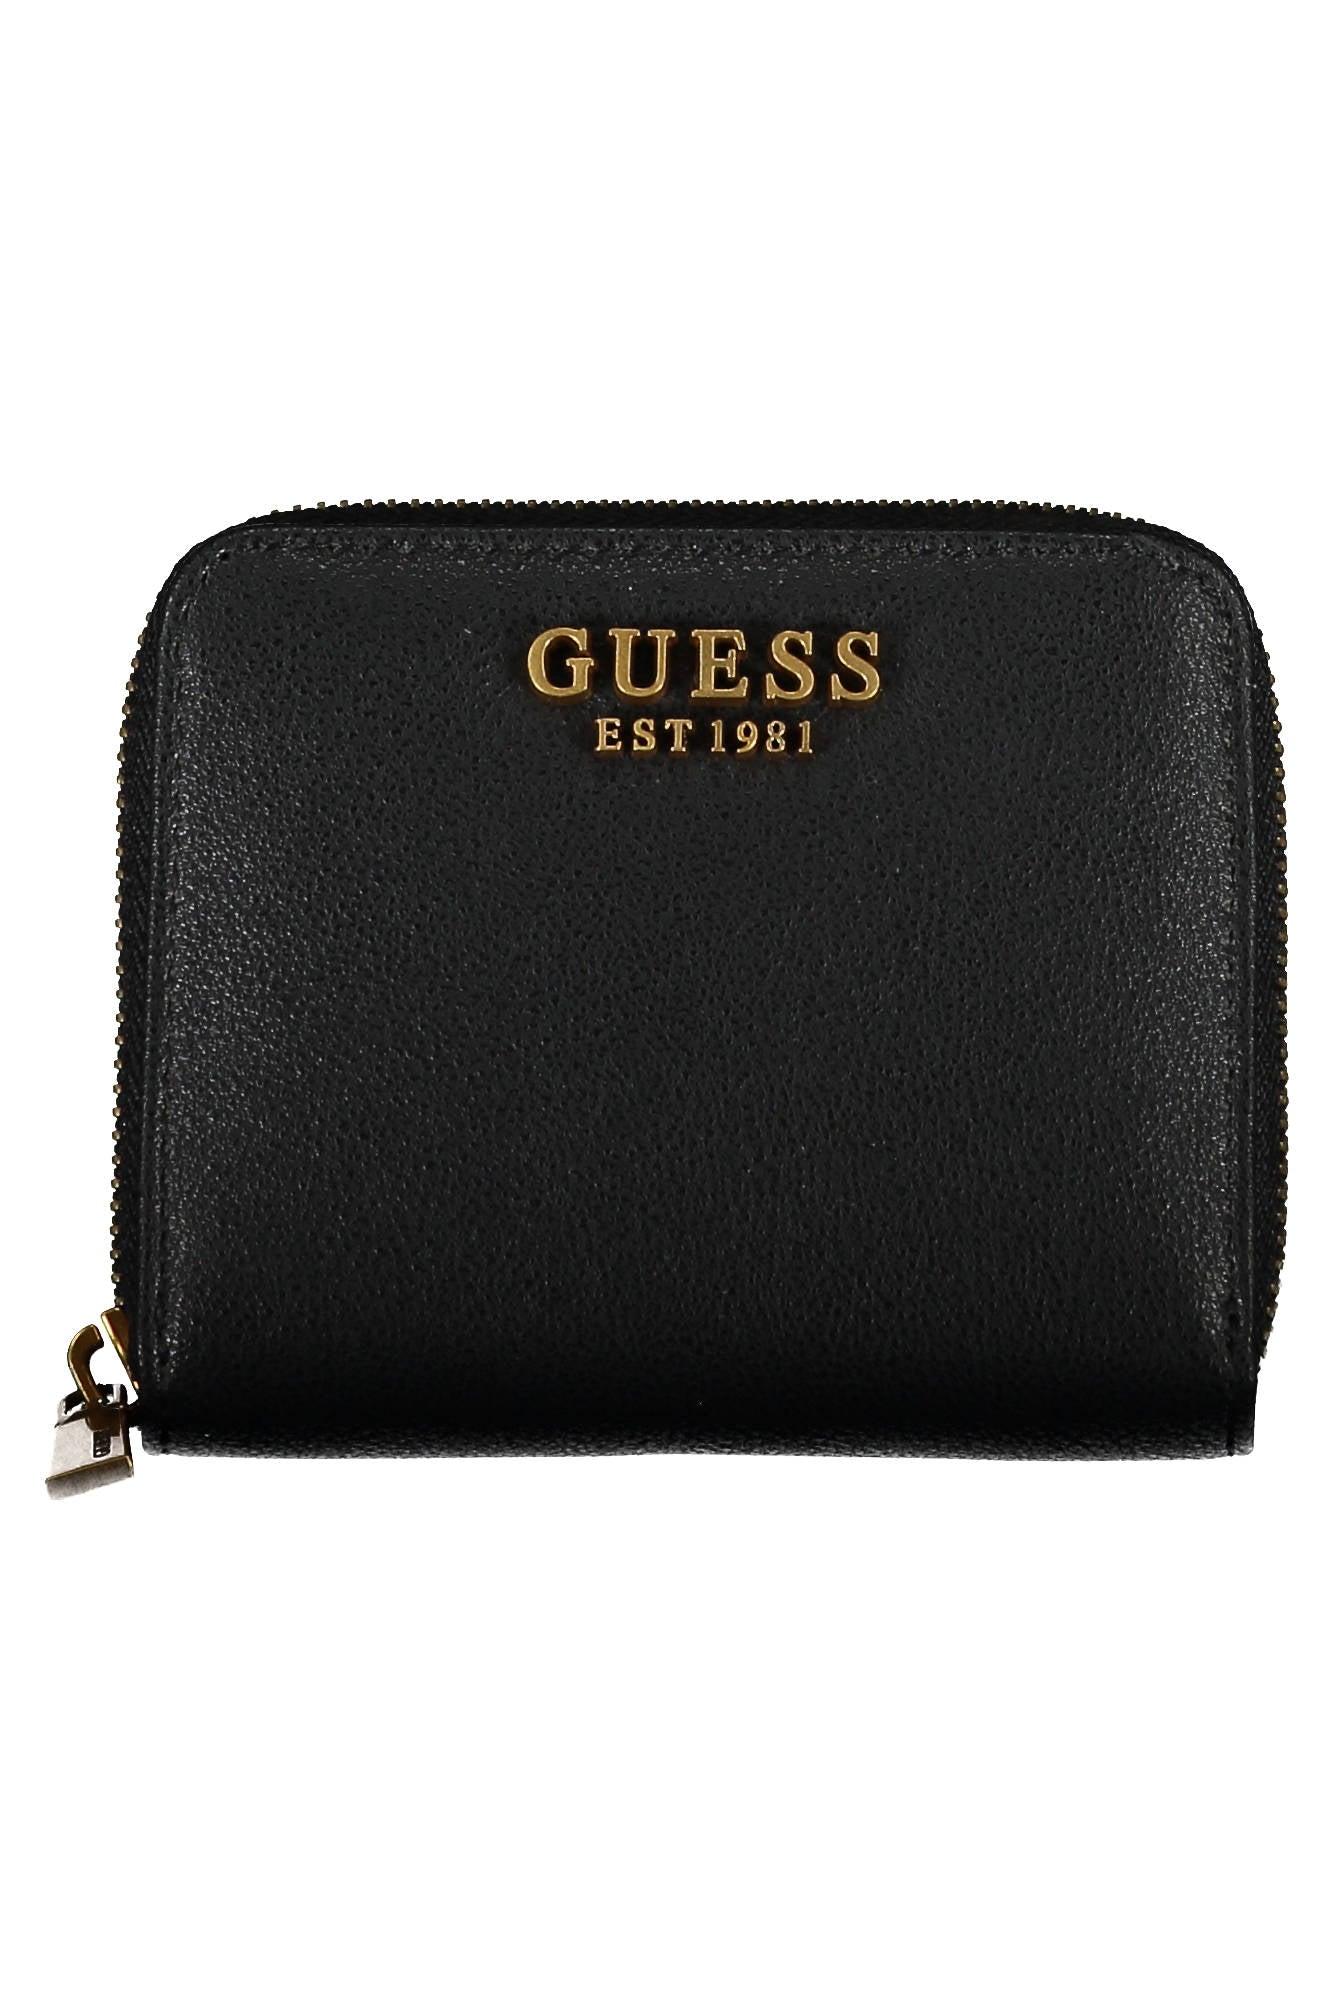 Guess Polyurethane Wallet in Black | Lyst